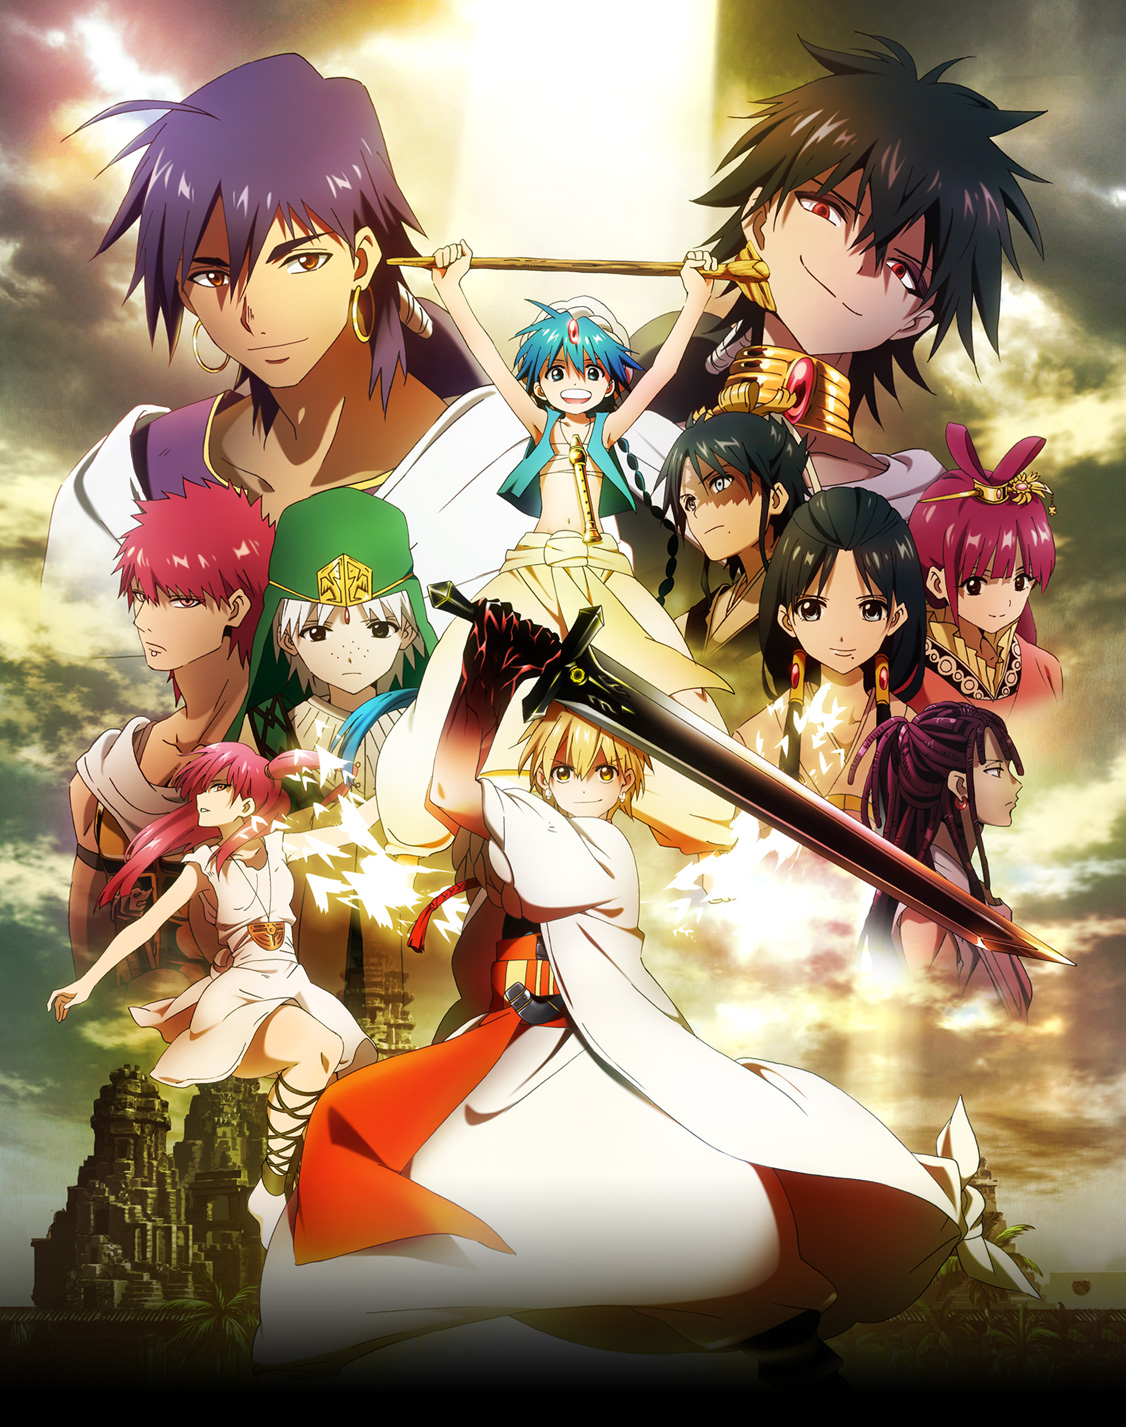 Magi The Labiryrinth of Magic Subtitle Indonesia 1-25 Completed (RE UPLOAD)